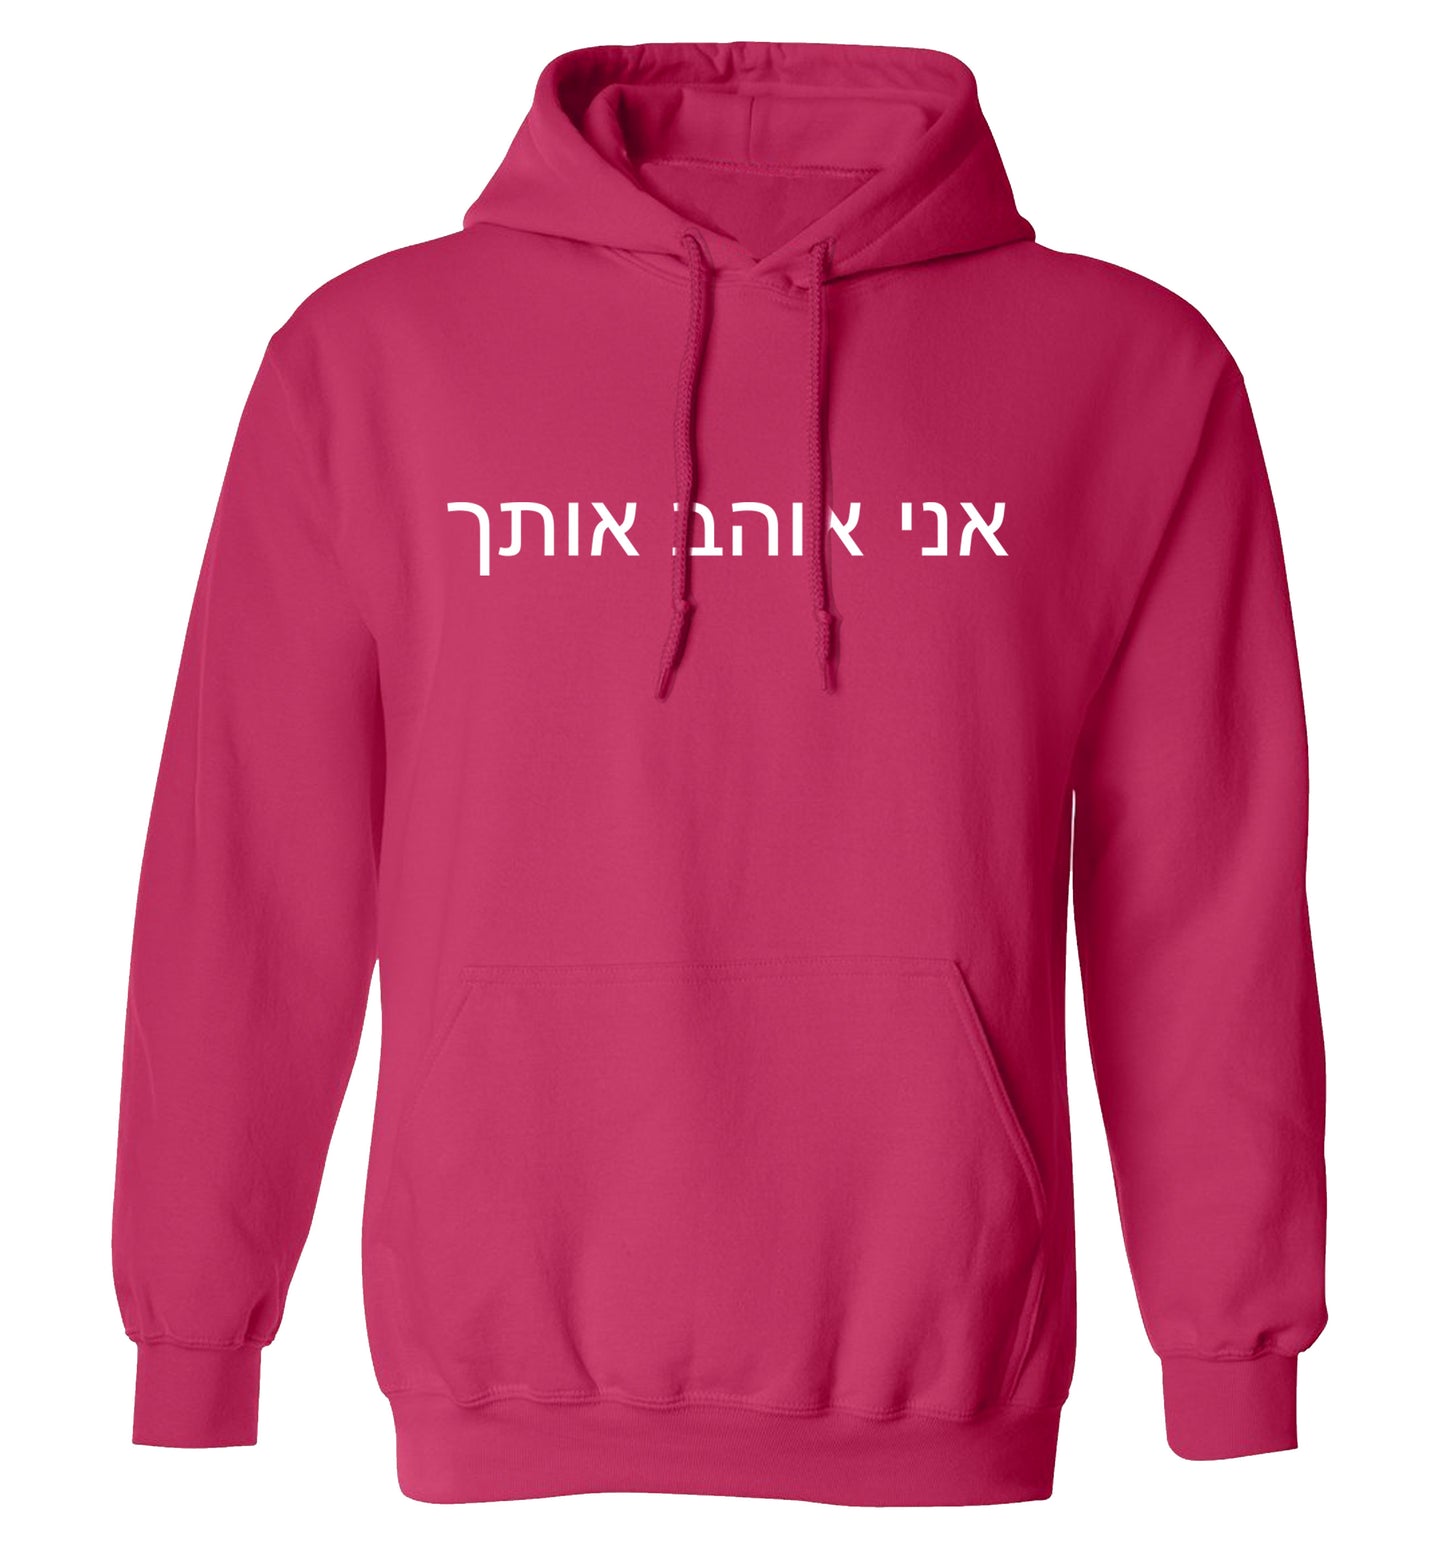 ___ ____ ____ - I love you adults unisex pink hoodie 2XL